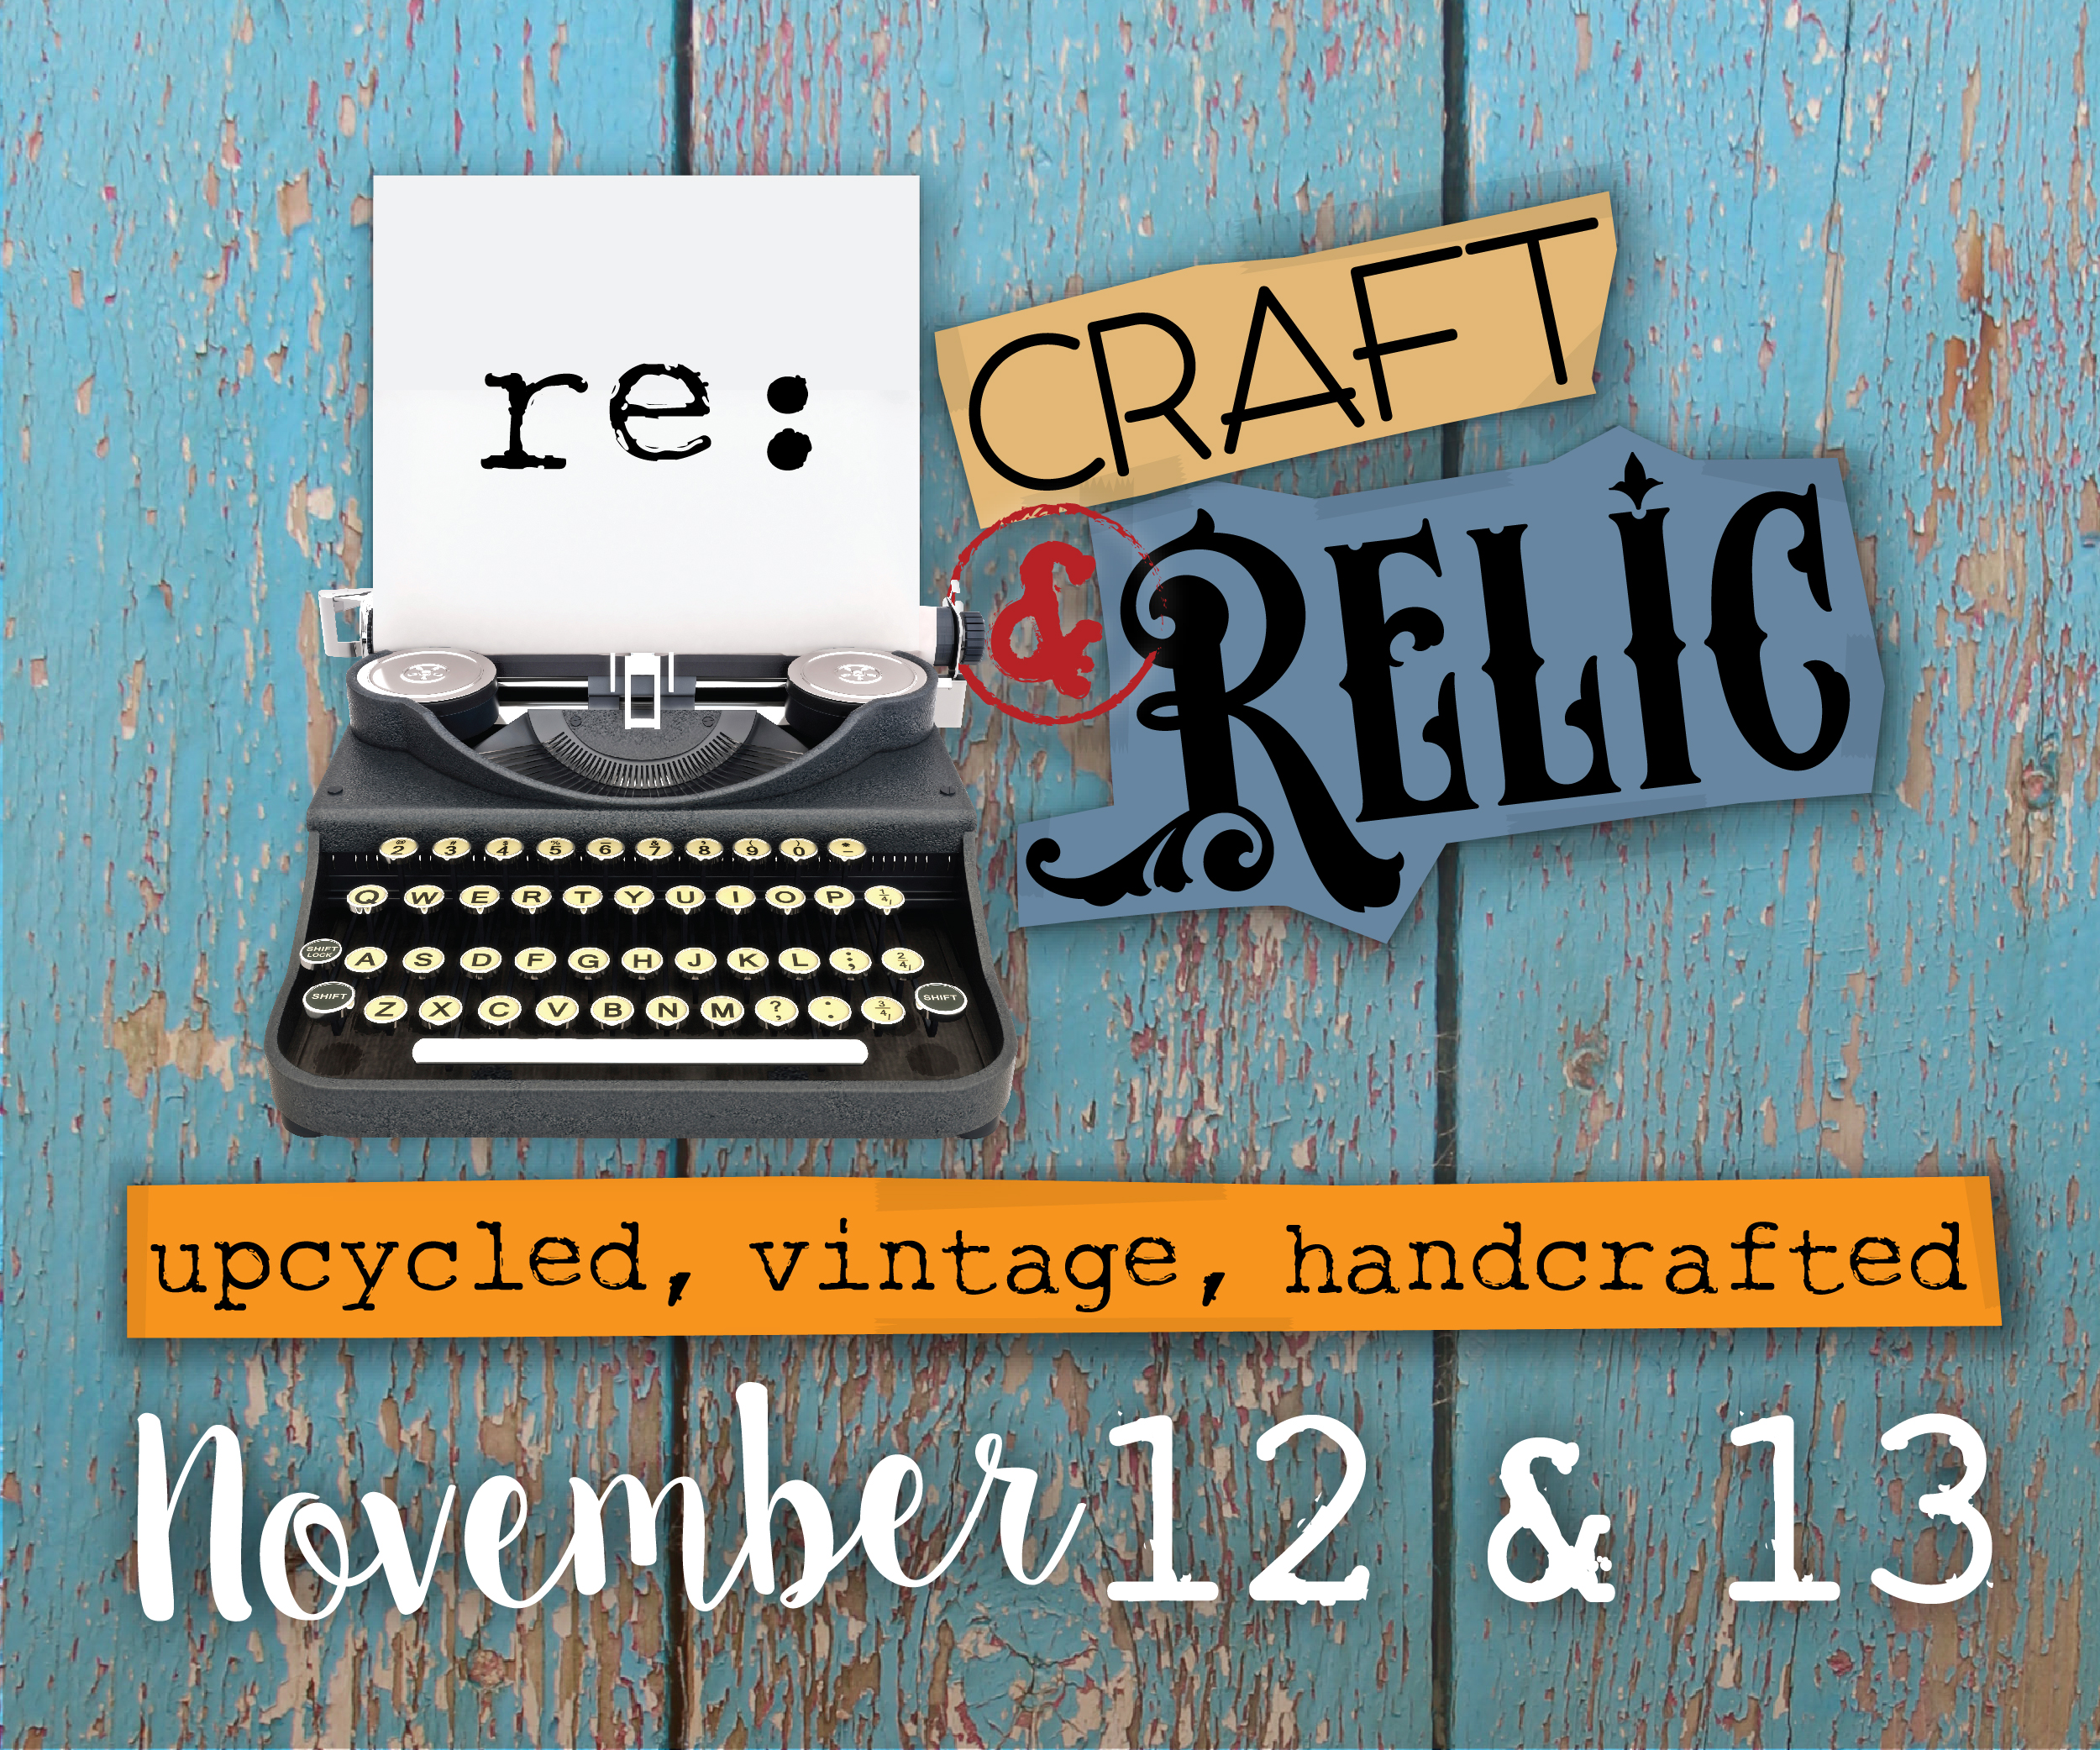 re:Craft and Relic Mobile Boutique » Urban Milwaukee